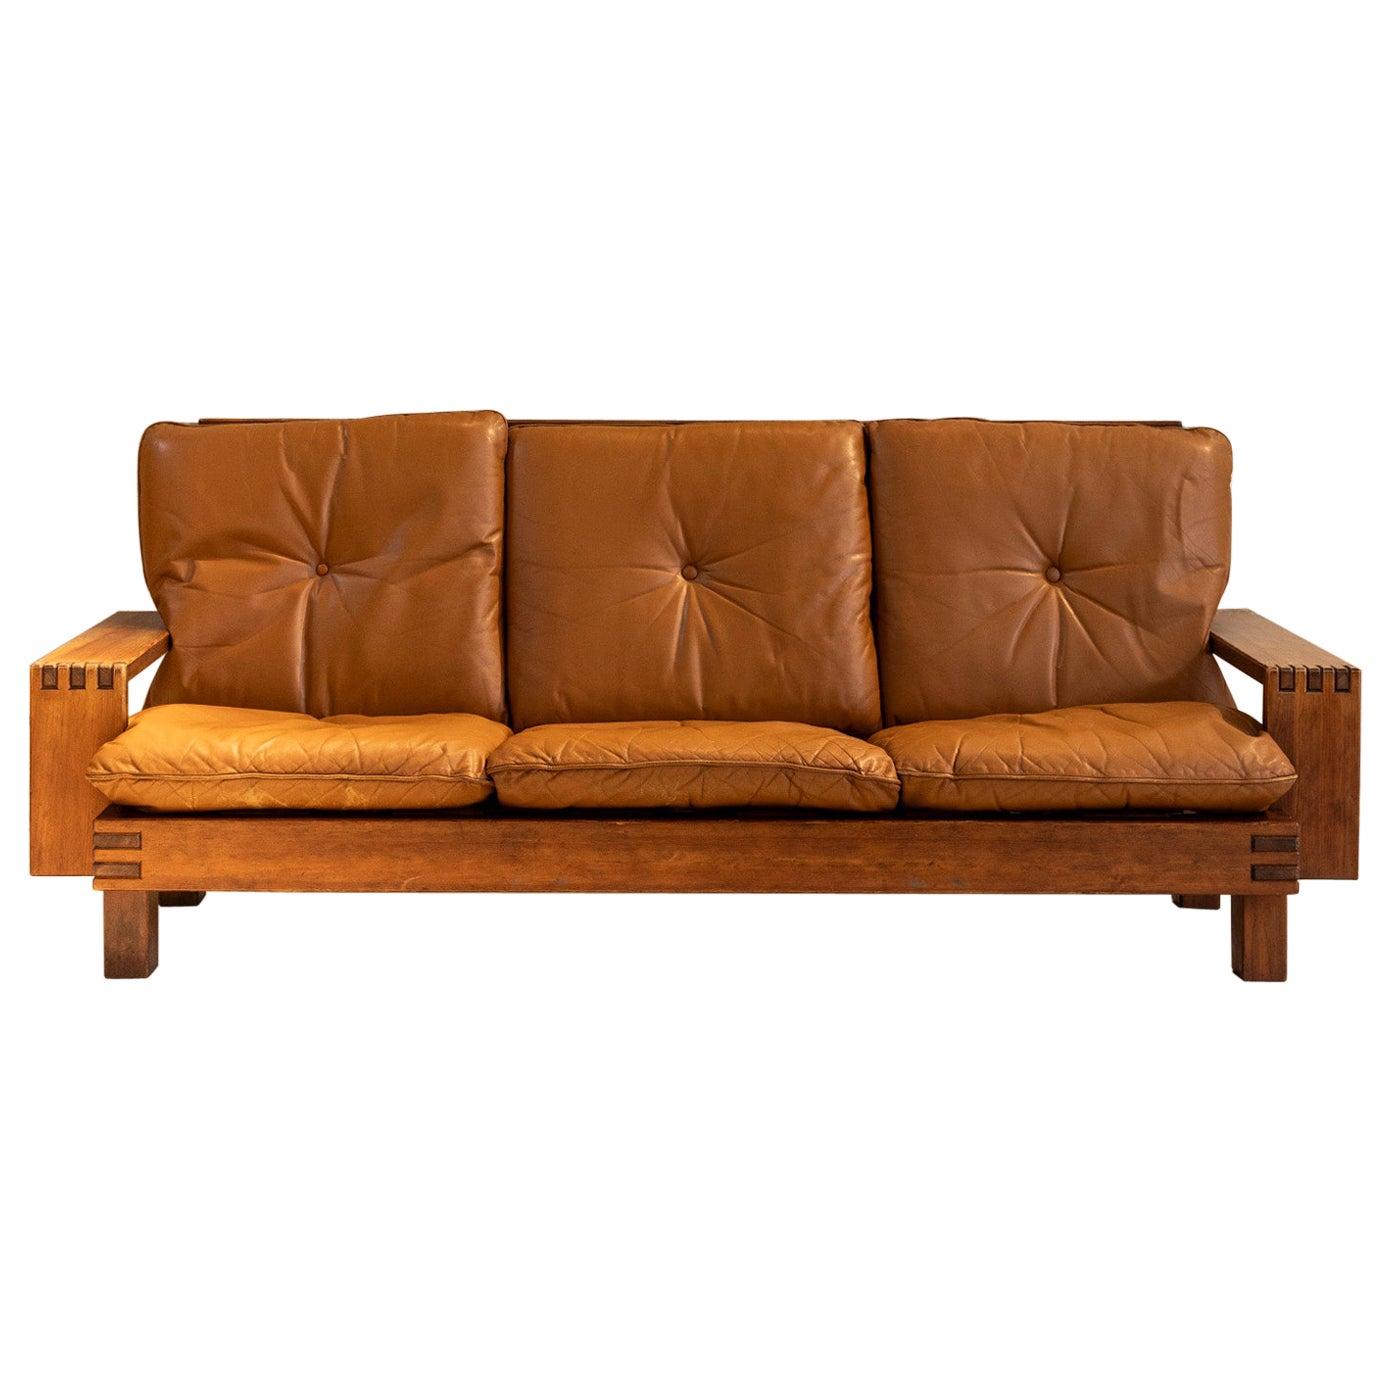 Mdcentury walnut sofa by Giuseppe Rivadossi for Officina Rivadossi 